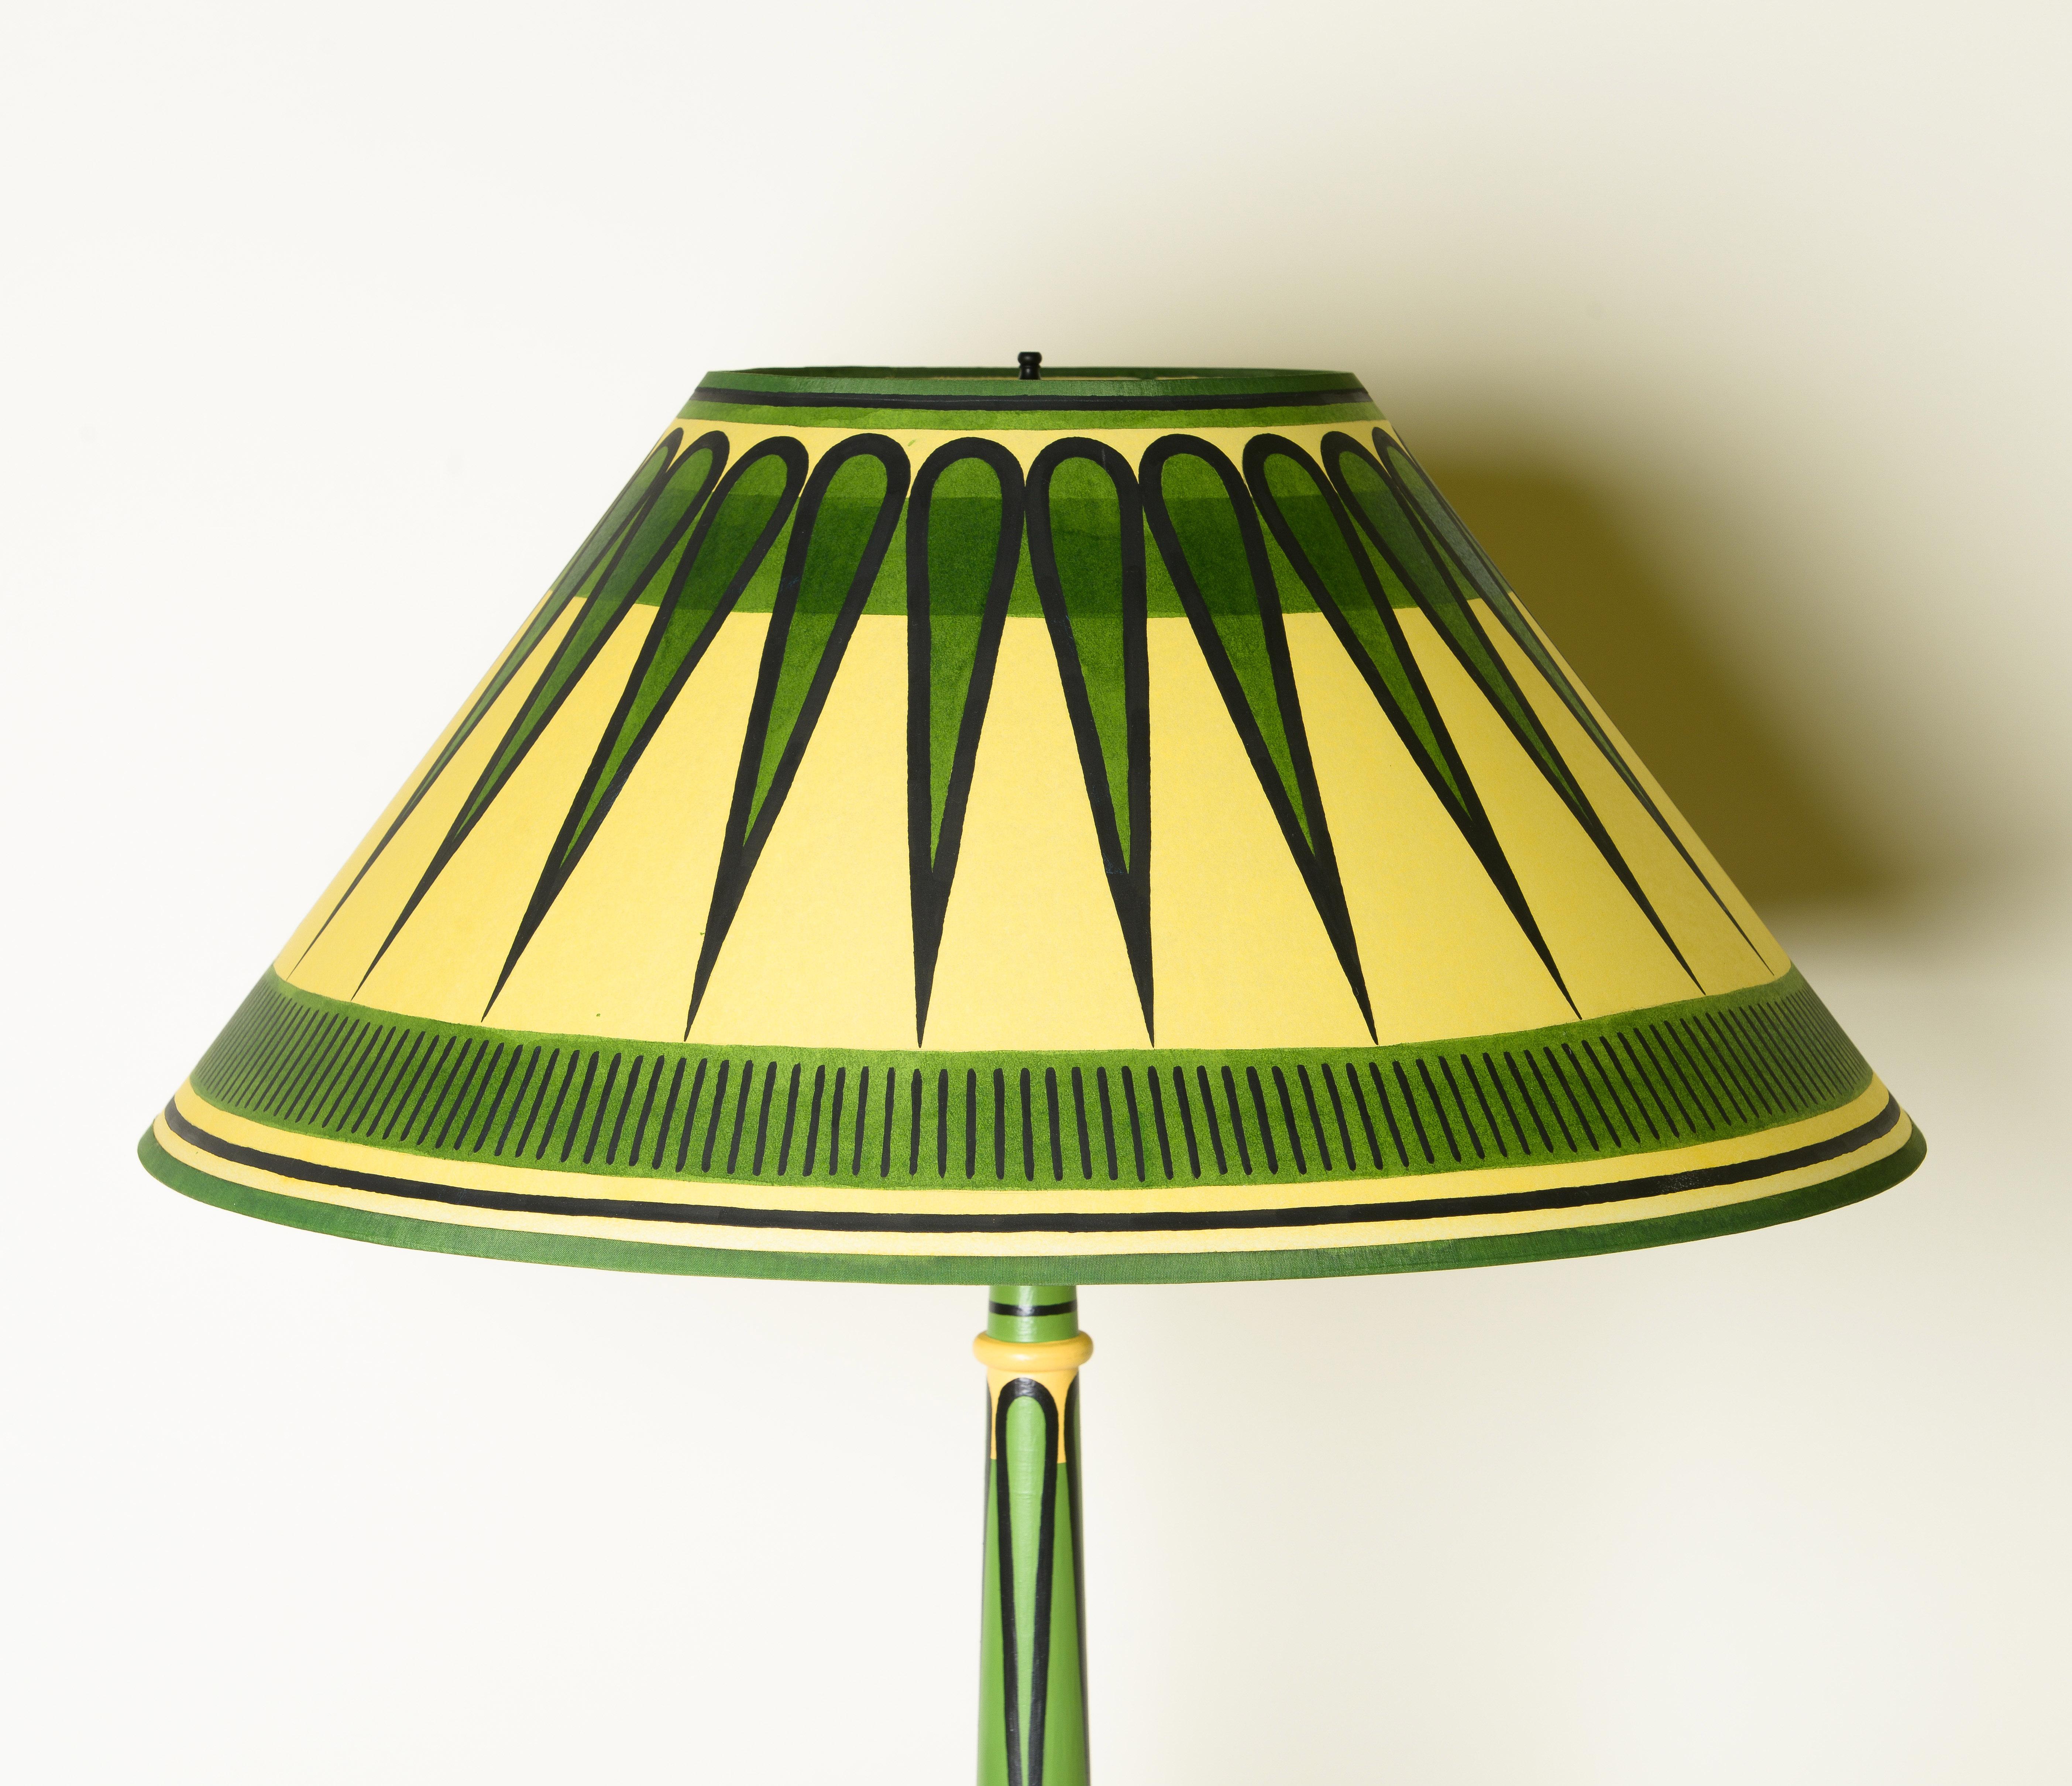 Hand-painted standing floor Lamp with matching shade wooden body  adorned with green, and black.

Cressida Bell is a British designer specialising in textiles and interiors. From her London studio, she produces a wide range of products including